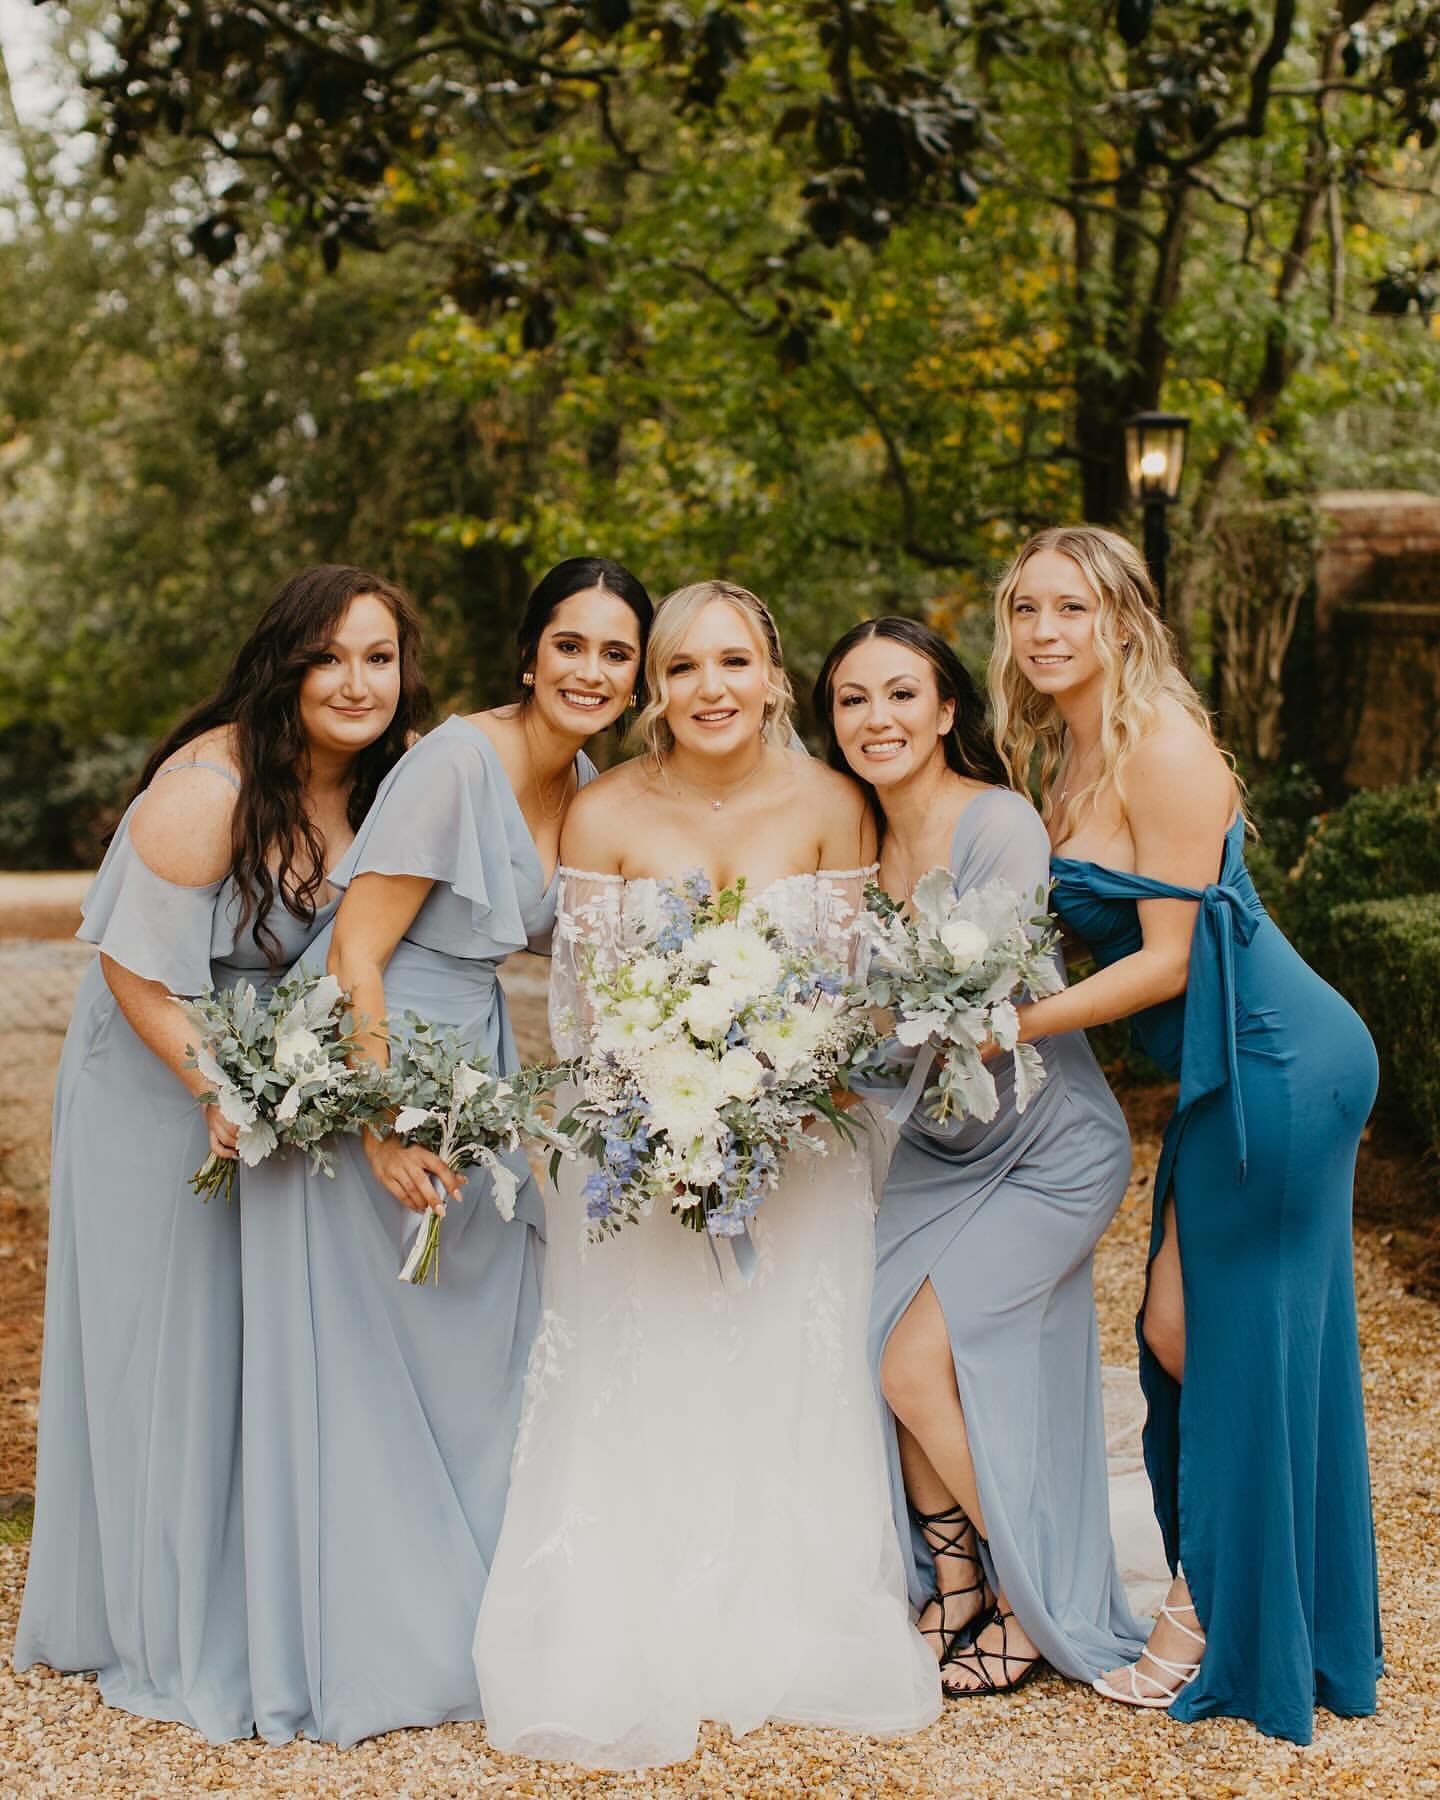 Keeping the #MondayBlues at bay with thoughts of beautiful wedding days 💙
We still have some 2024 dates available, so if you&rsquo;re ready to say &ldquo;I do!&rdquo; click the link in our bio to request more info today!

Photo: @emmanuelbrooks_
Ven